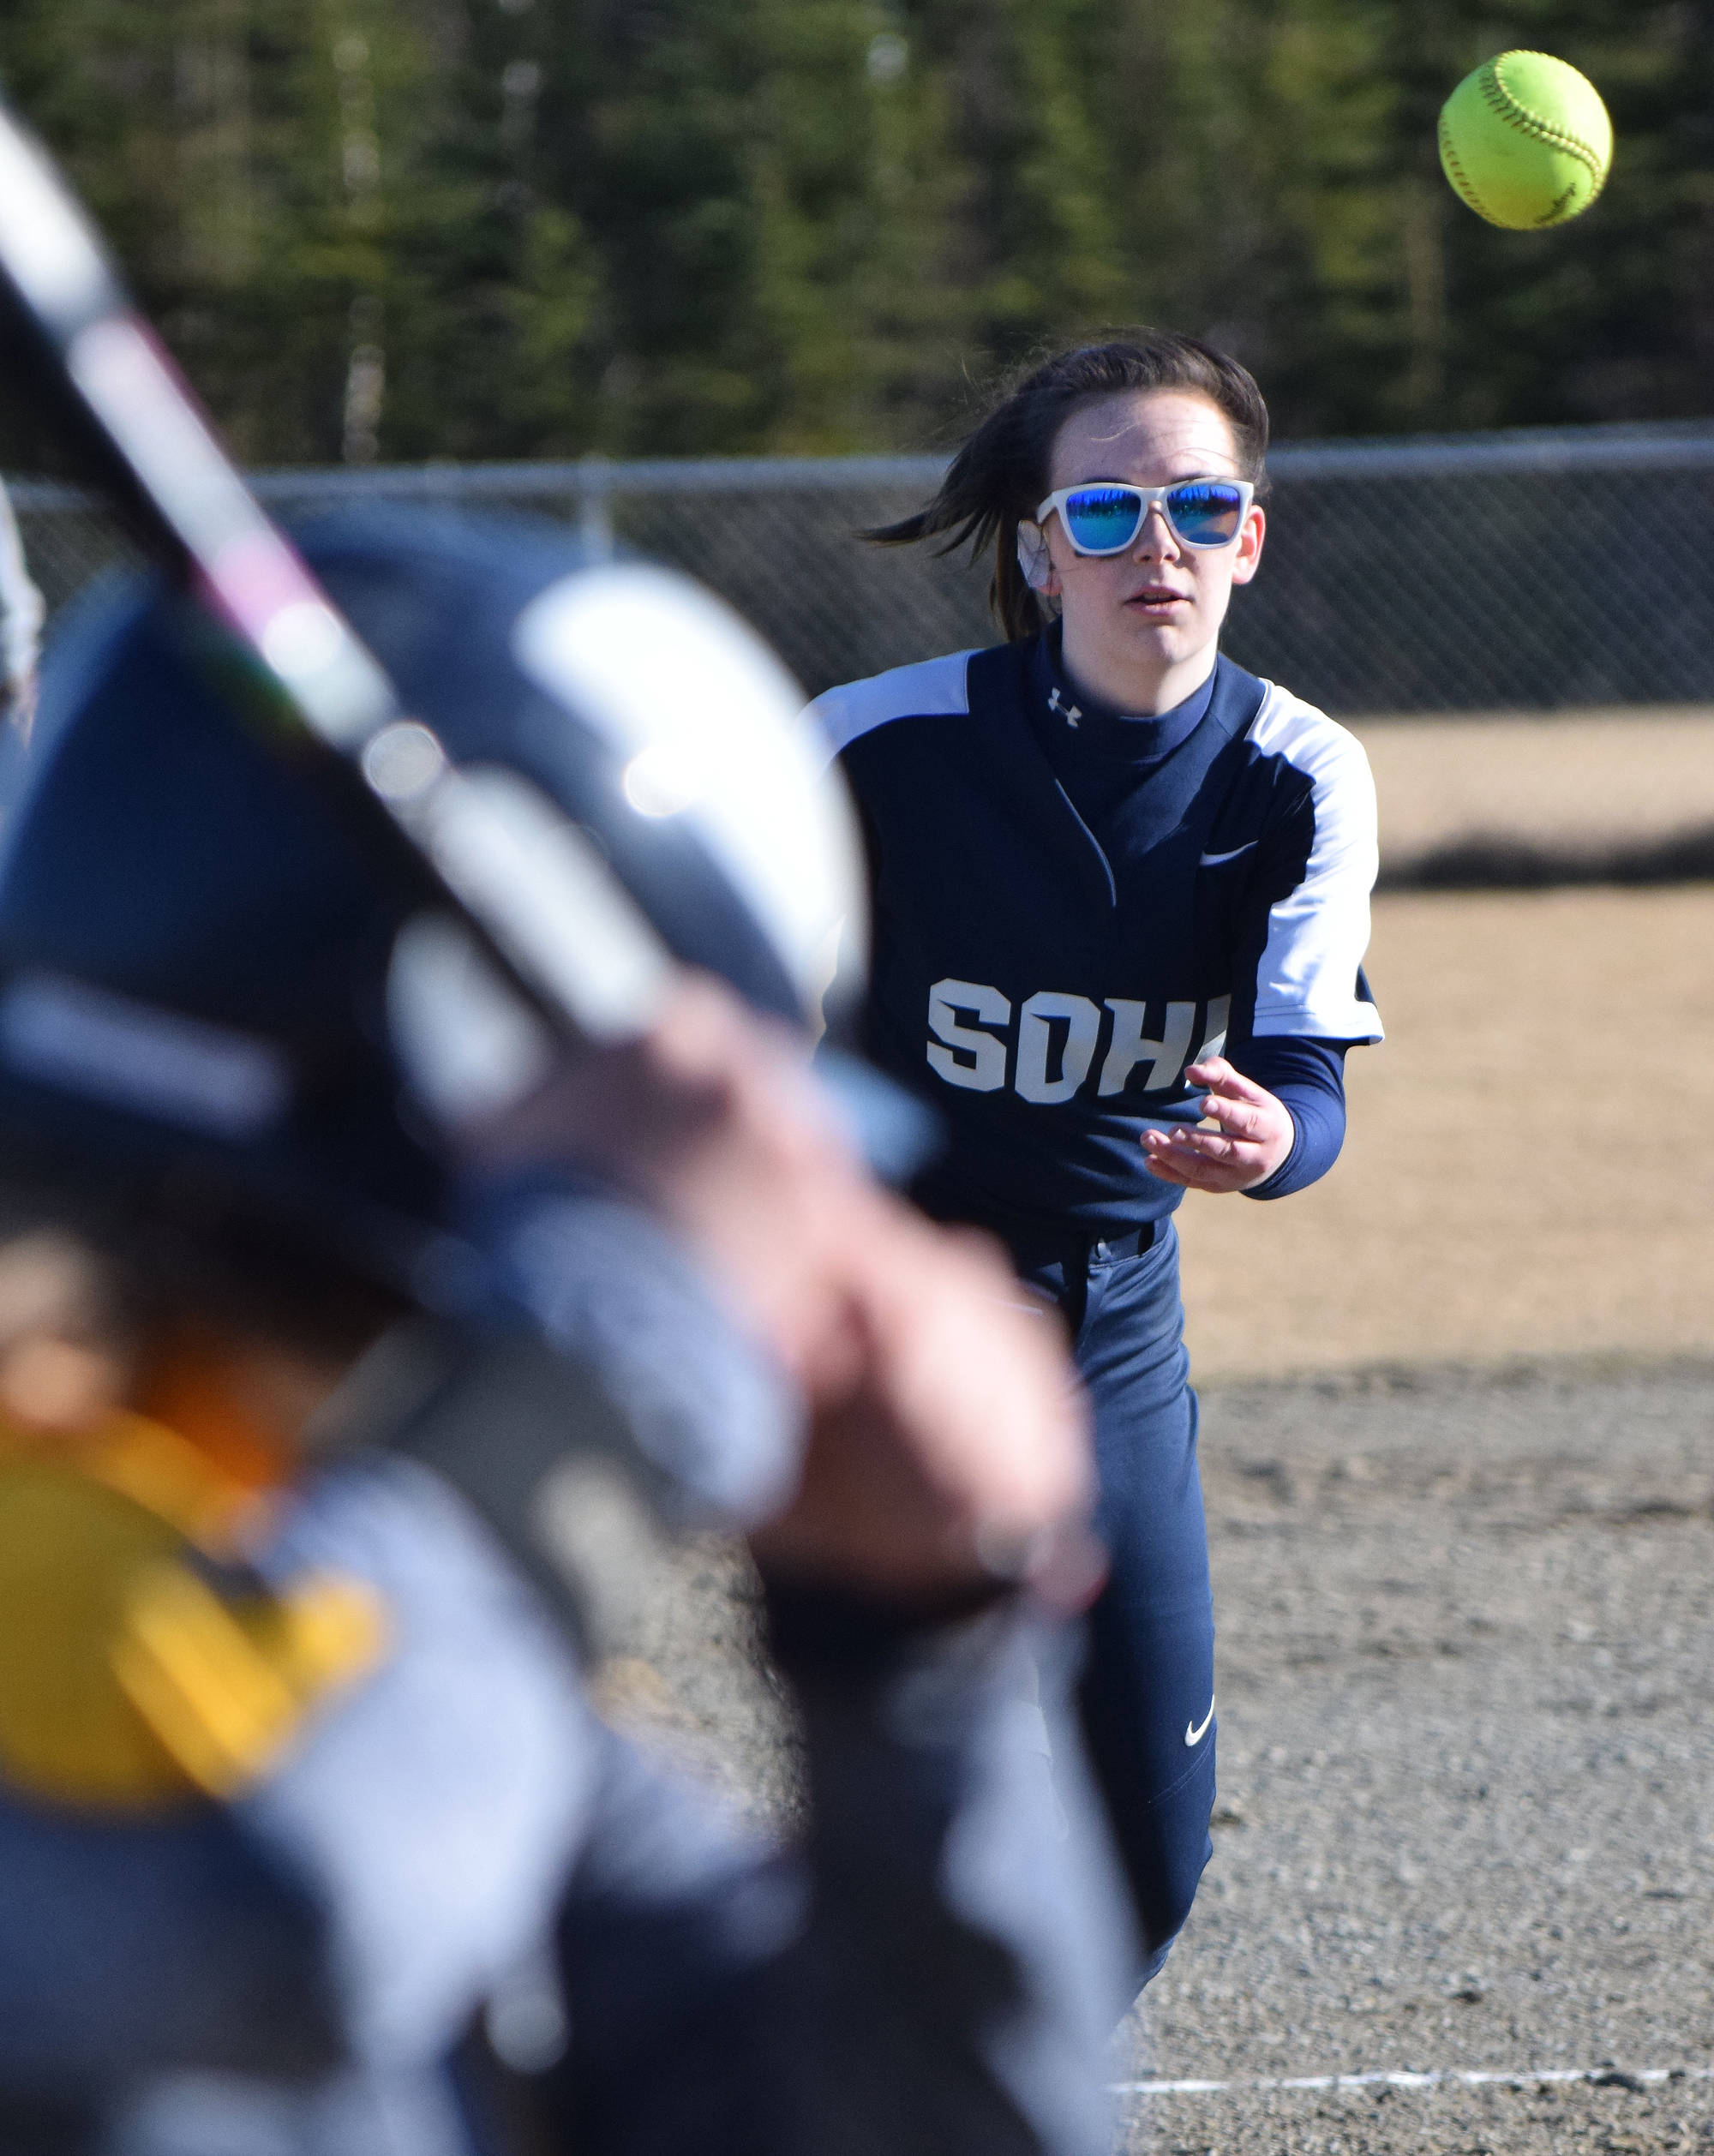 Soldotna pitcher Tara Lynn Frates offers up a pitch Tuesday evening to a Homer batter at the Soldotna Little League fields. (Photo by Joey Klecka/Peninsula Clarion)